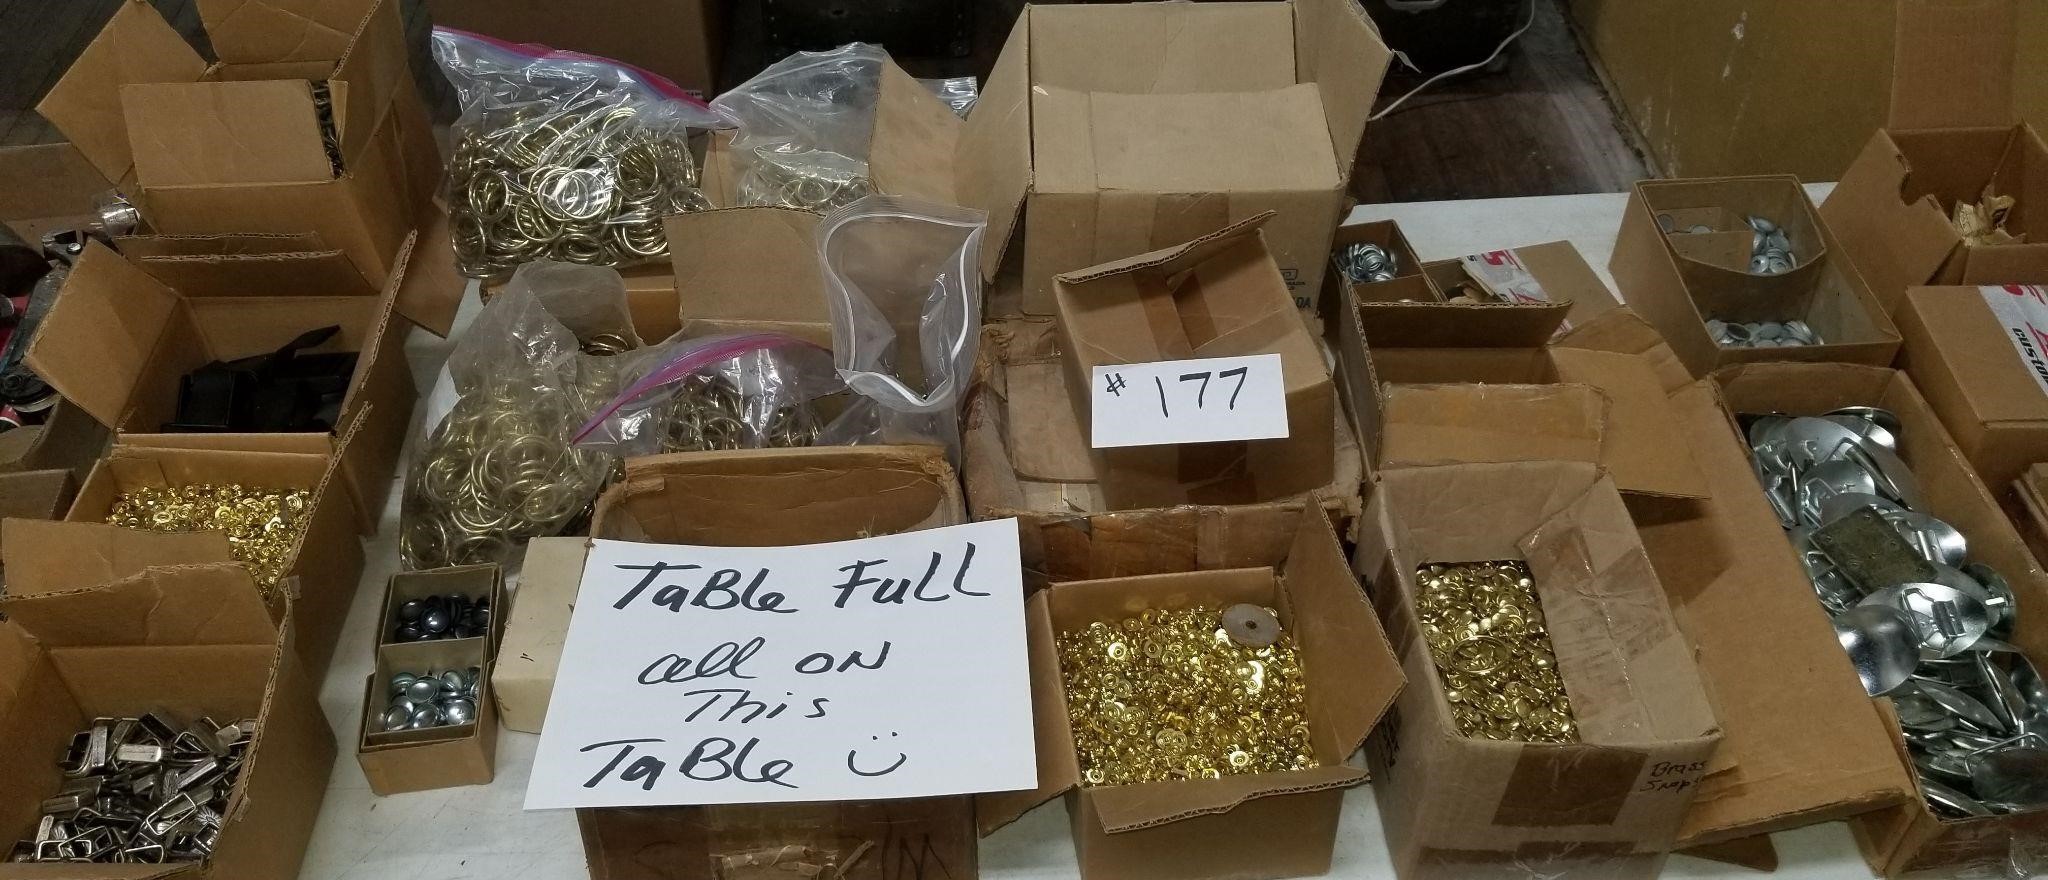 Table Full-Buttons, Fasteners, Belt Buckles & more